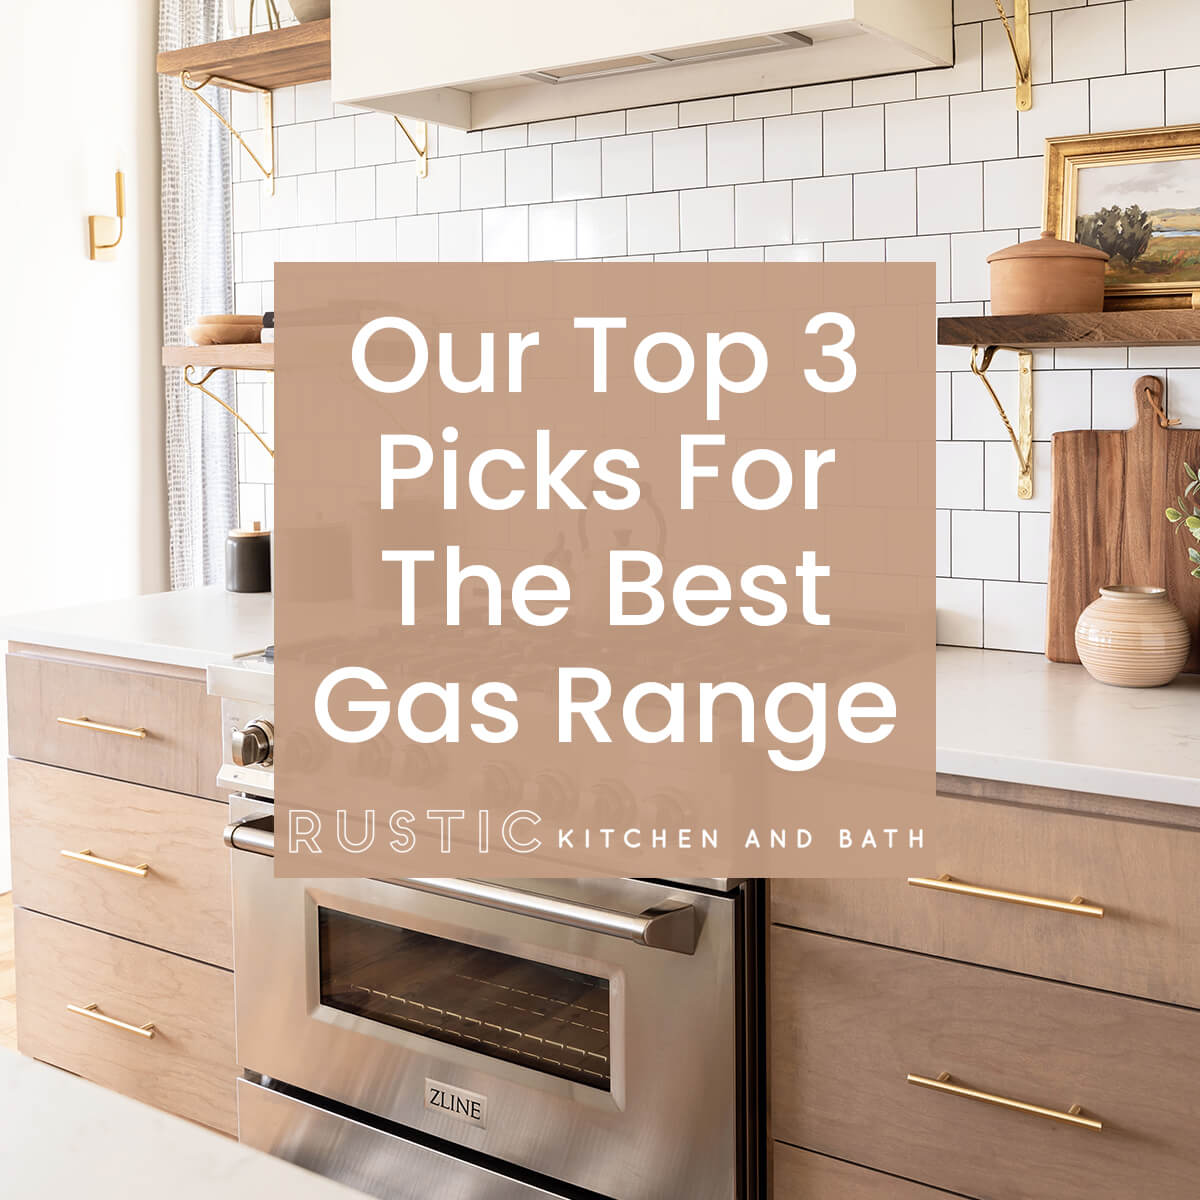 Our Top 3 Picks for the Best Gas Range